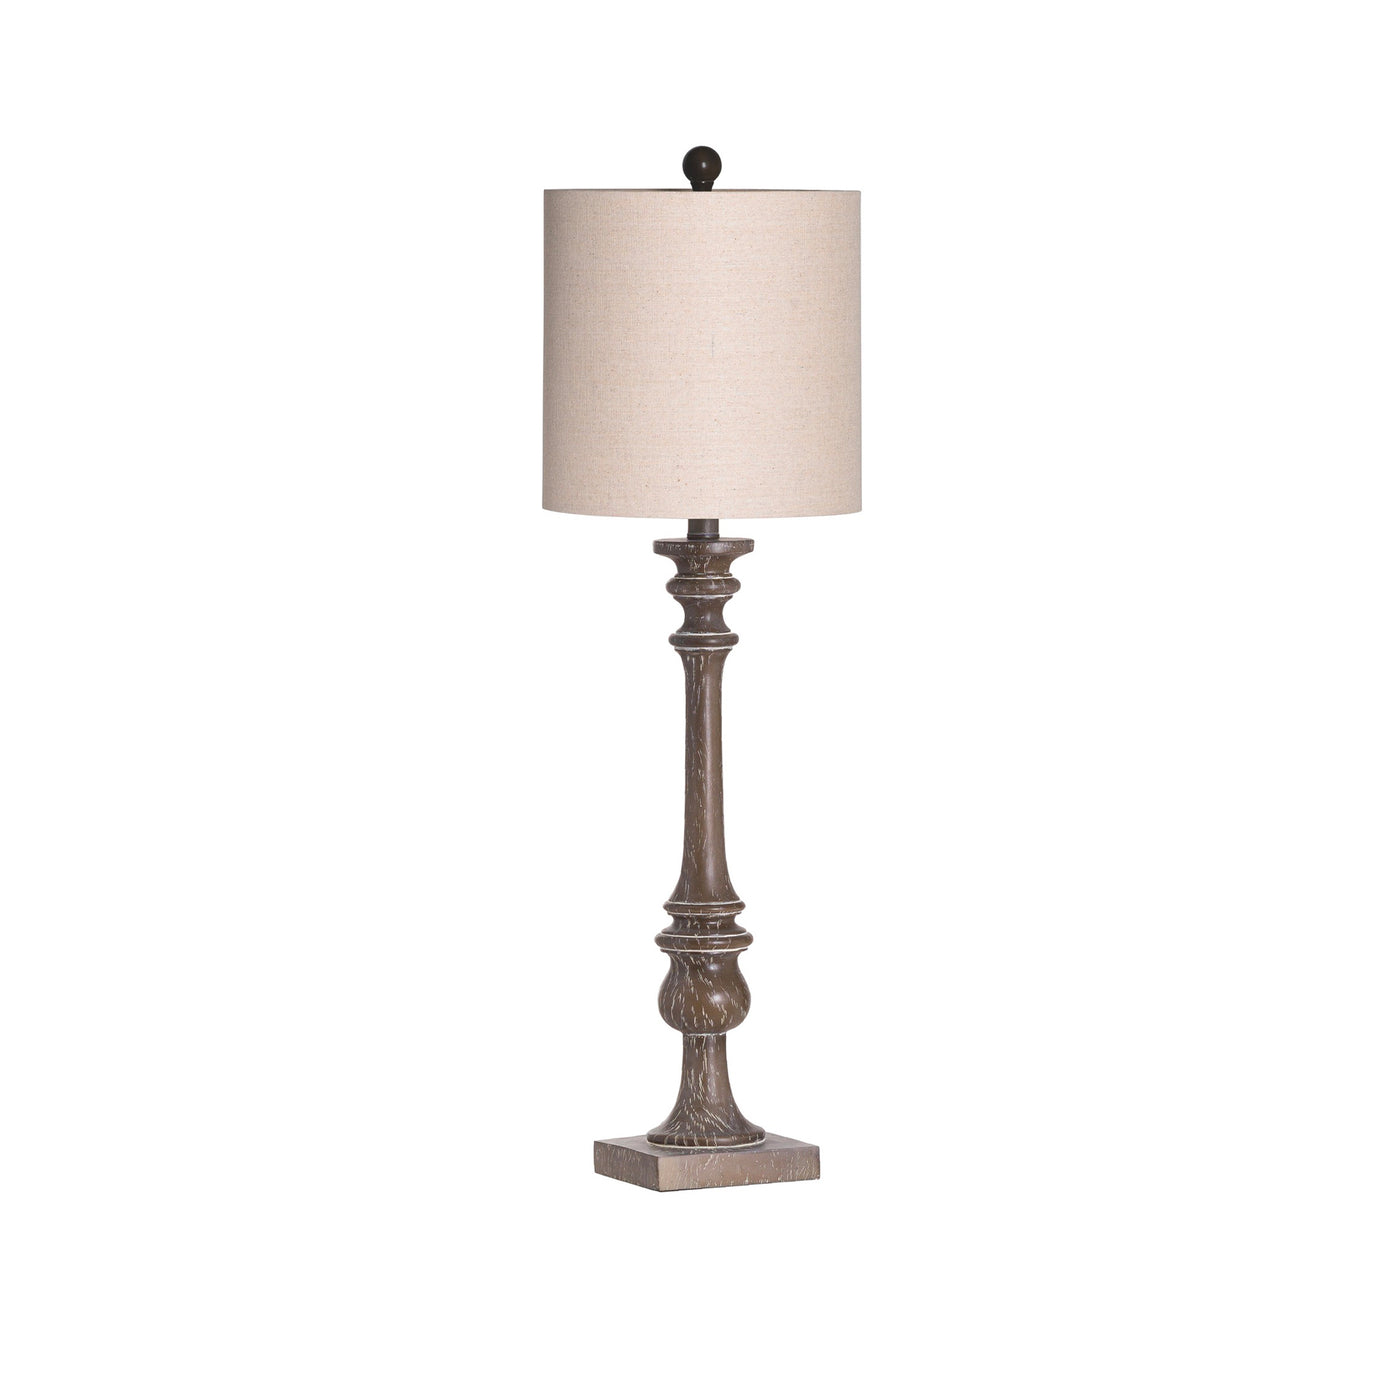 Nelson - Table Lamp Brown & Beige